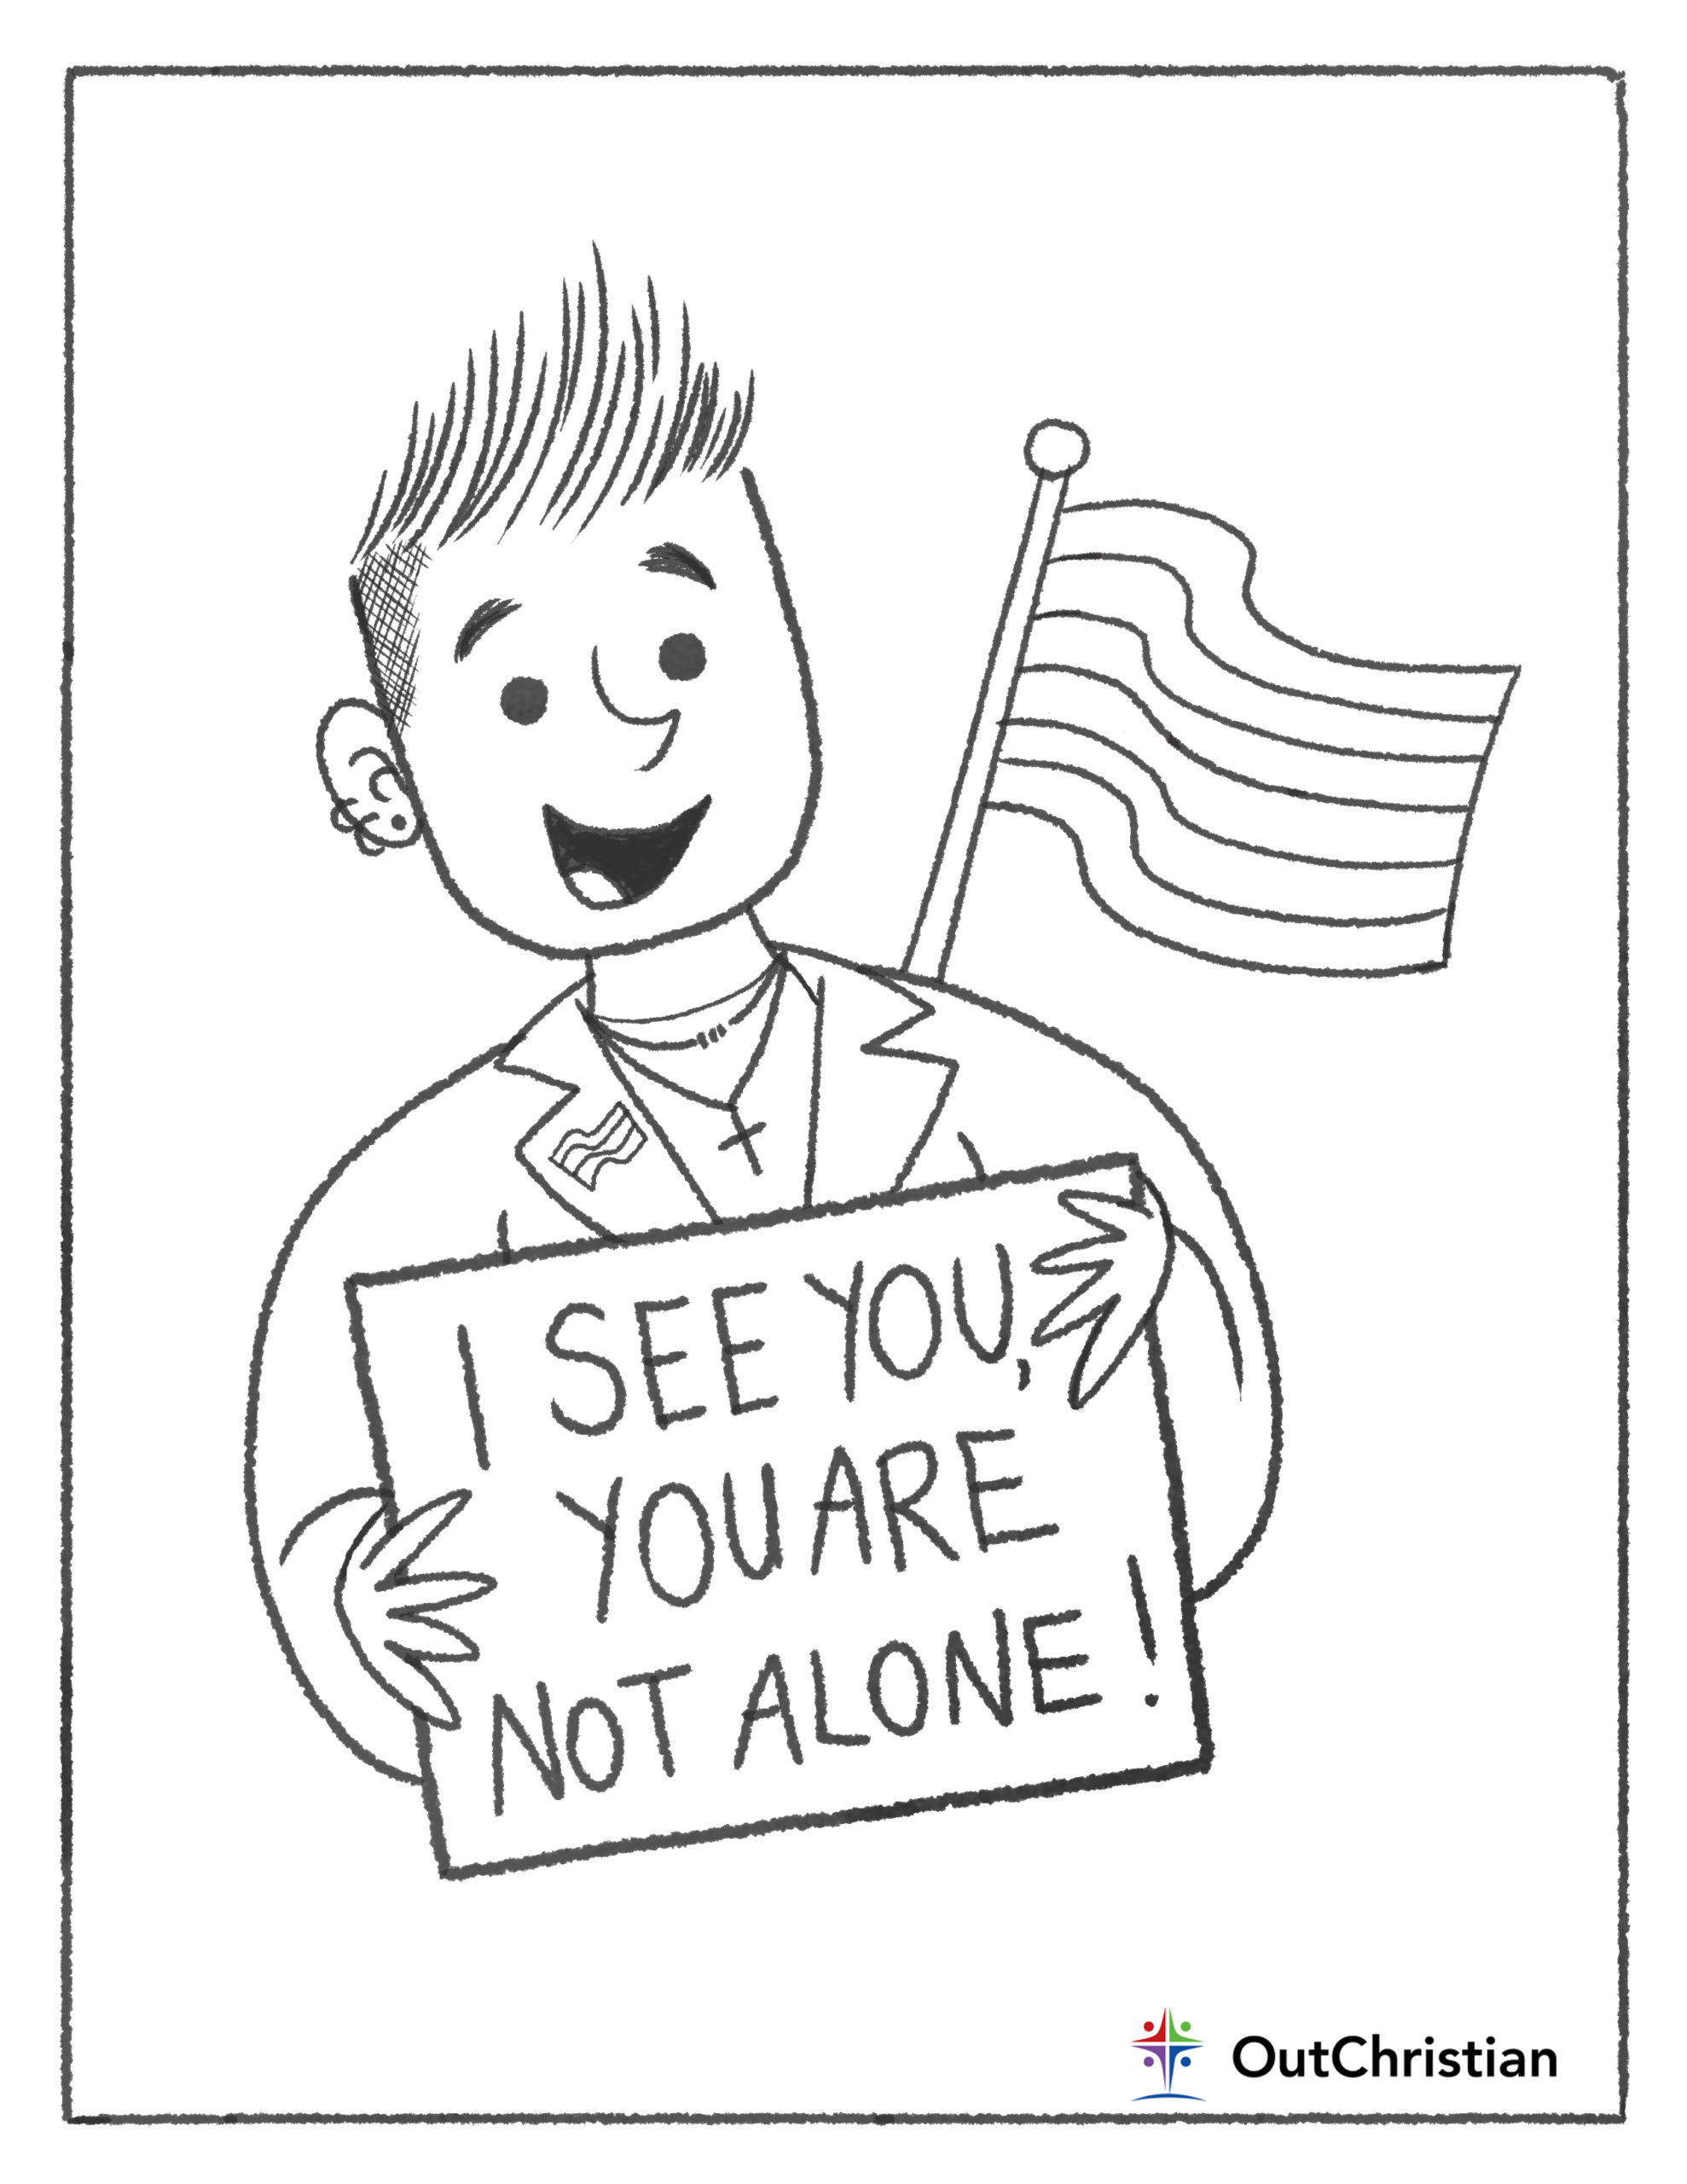 Have Some Fun With These LGBTQ Christian Coloring Pages – OutChristian